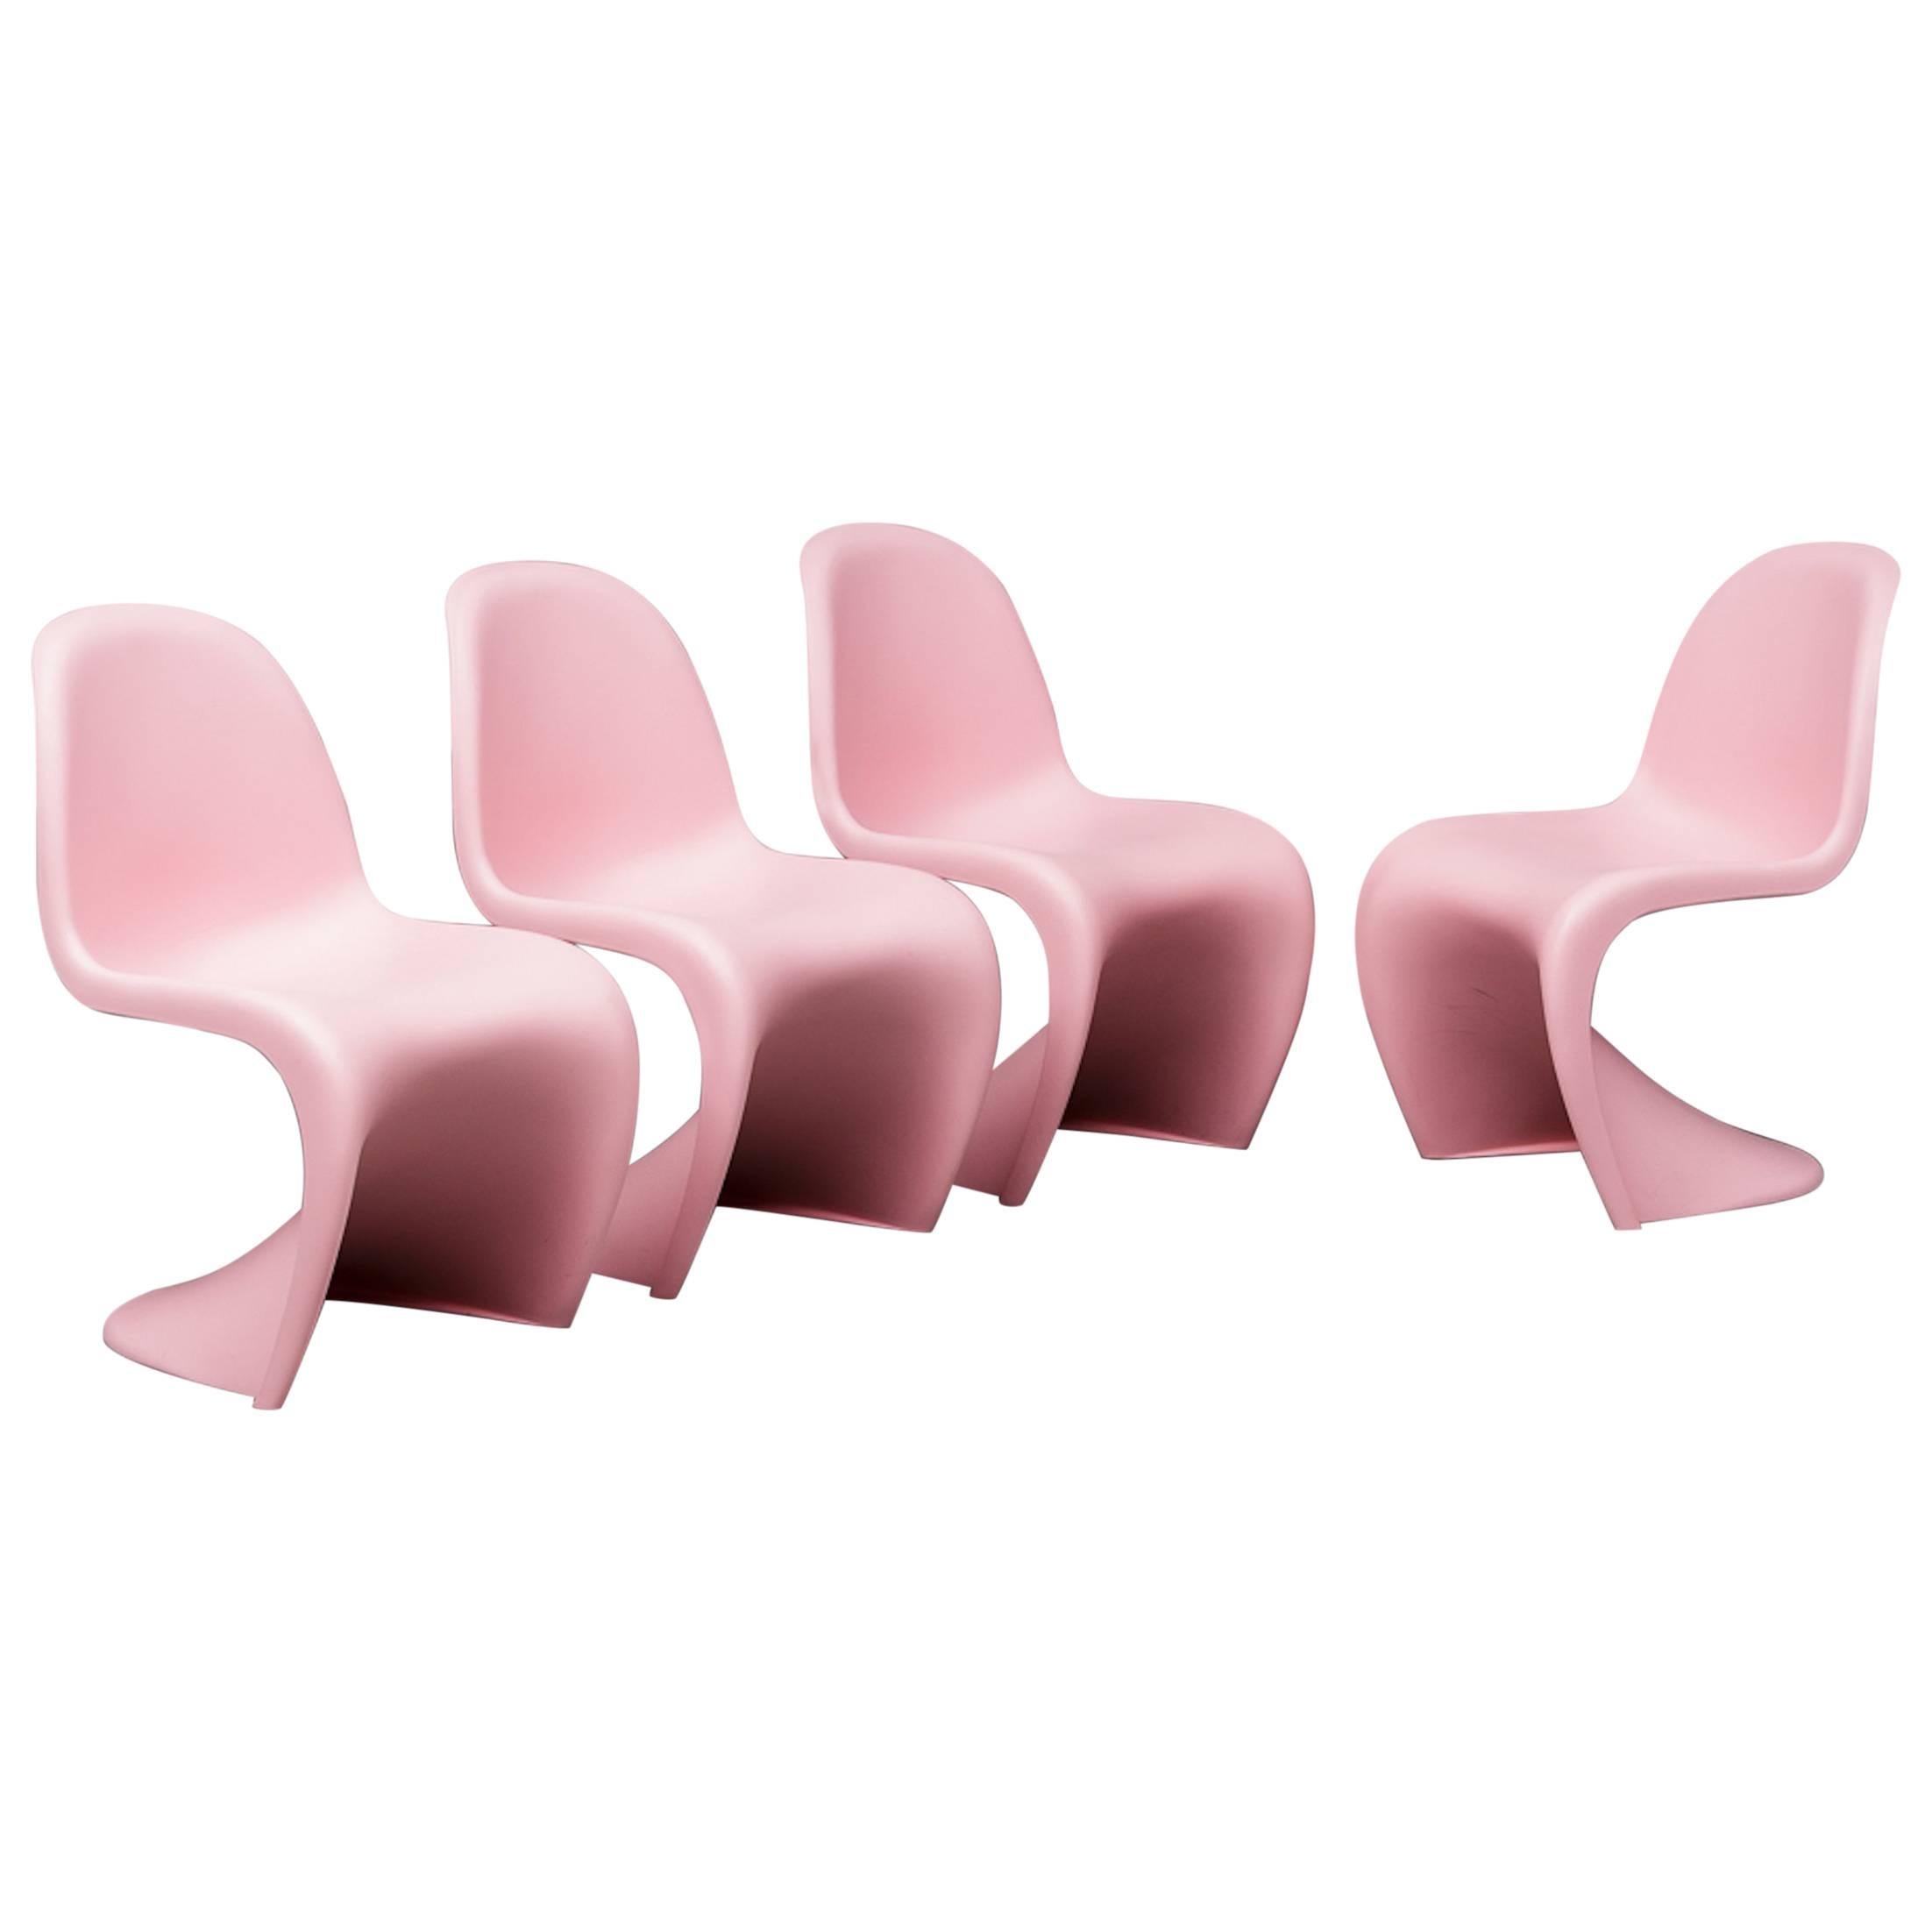 Verner Panton, "S" Chairs For Sale